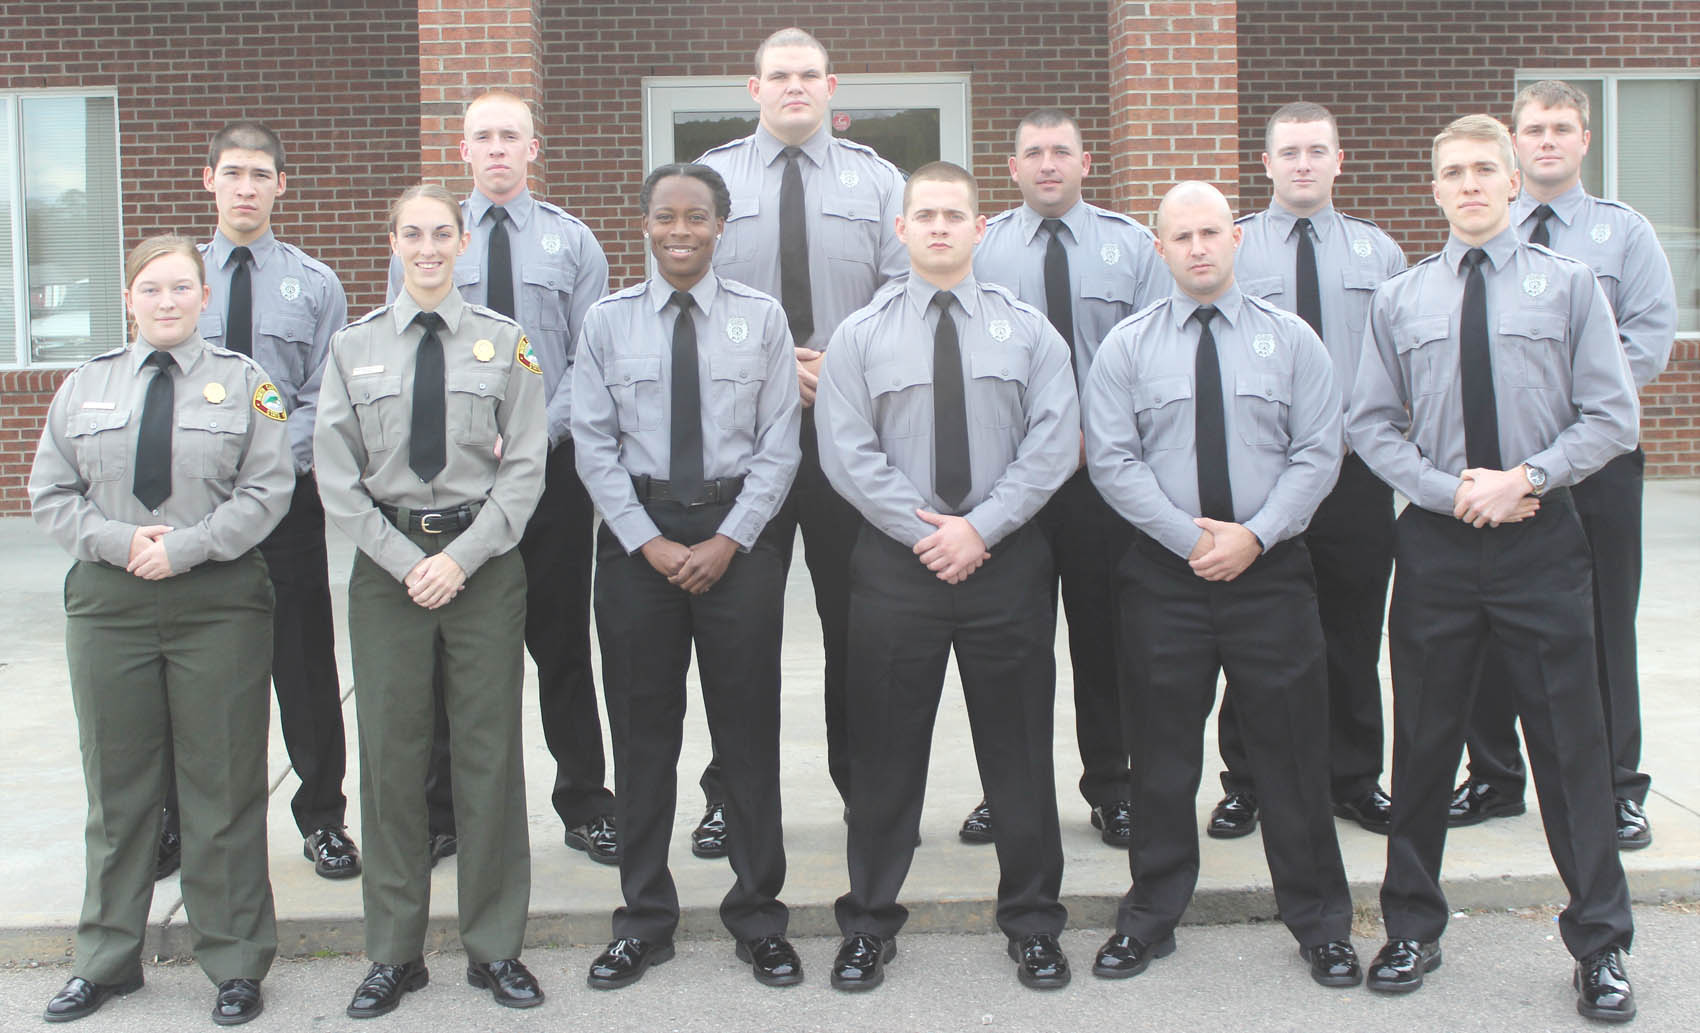 Click to enlarge,  Recent graduates of the Central Carolina Community College Basic Law Enforcement Training program are, left to right: front row, Kassie Amber Moore of Durham, Carla Ann Porterfield of Carrboro, Carol Meritt Lewis of Raleigh, Mitchell Thomas Coggins of Sanford, Jonathan Kyle Dorman of Sanford, and Charles Holden Broyhill of Raleigh; back row, Nicholas Brian Robbins of Holly Springs, Devin Dwight Layne of Sanford, William David Cockman of Siler City, Justin Ryan McLeod of Coats, Stephen Thomas Diggs of Fuquay-Varina, and Nathan Bradley Snyder of Sanford. For more information on the Central Carolina Community College Basic Law Enforcement Training program, contact Robert Powell at rpowell@cccc.edu or call 919-777-7774, or visit the college website at www.cccc.edu/blet. 